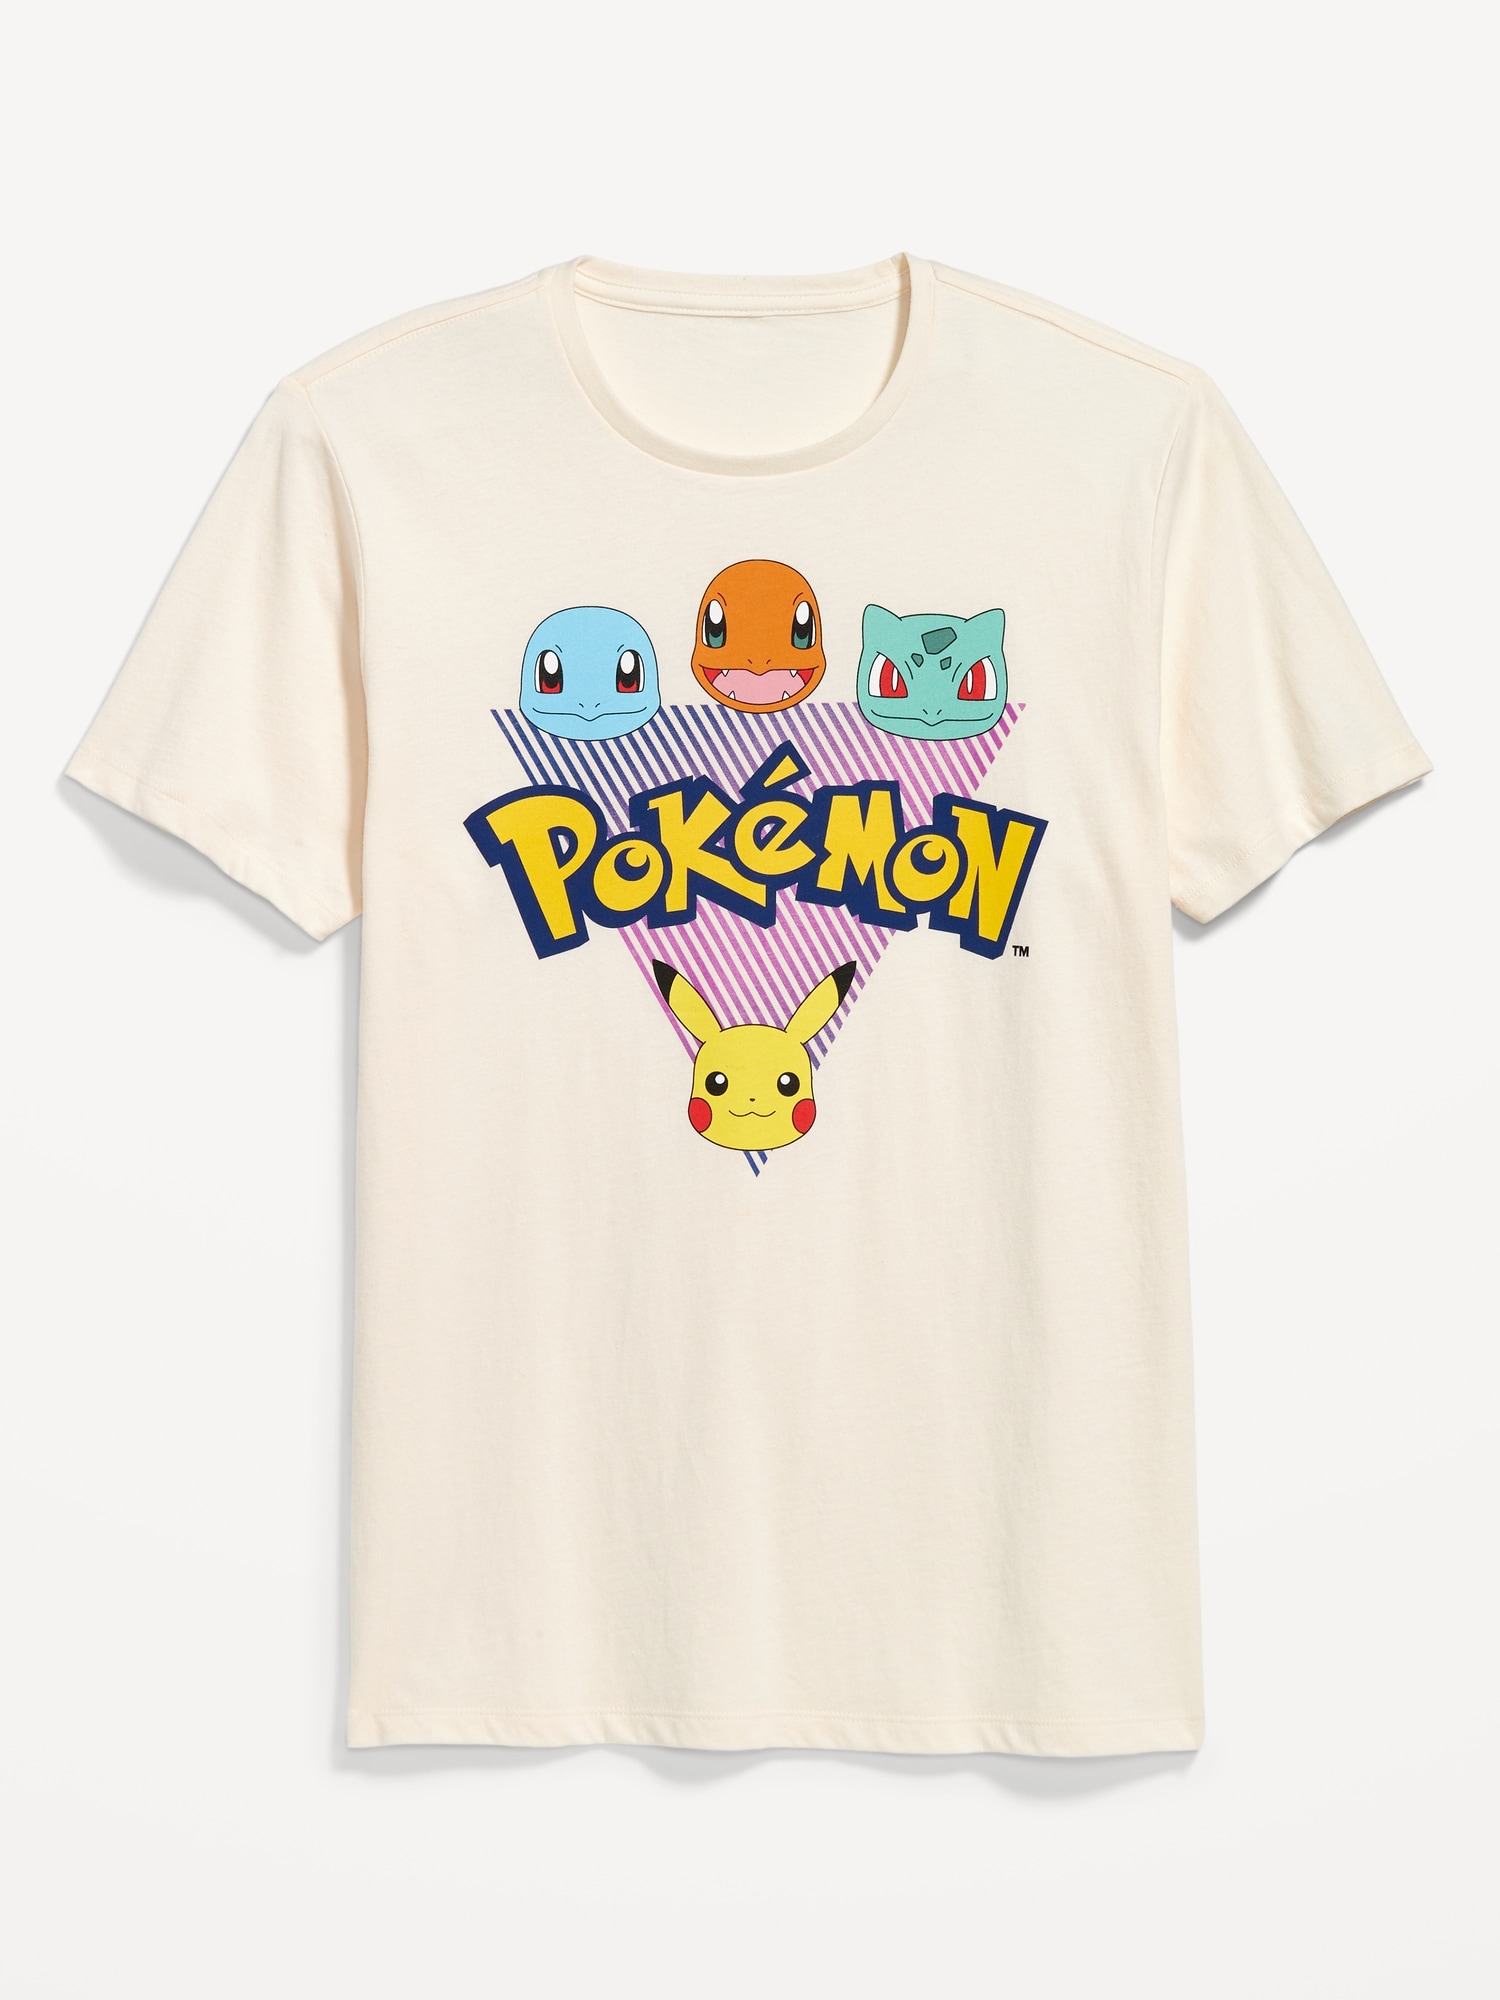 Pokmon Gender-Neutral Graphic T-Shirt for Adults